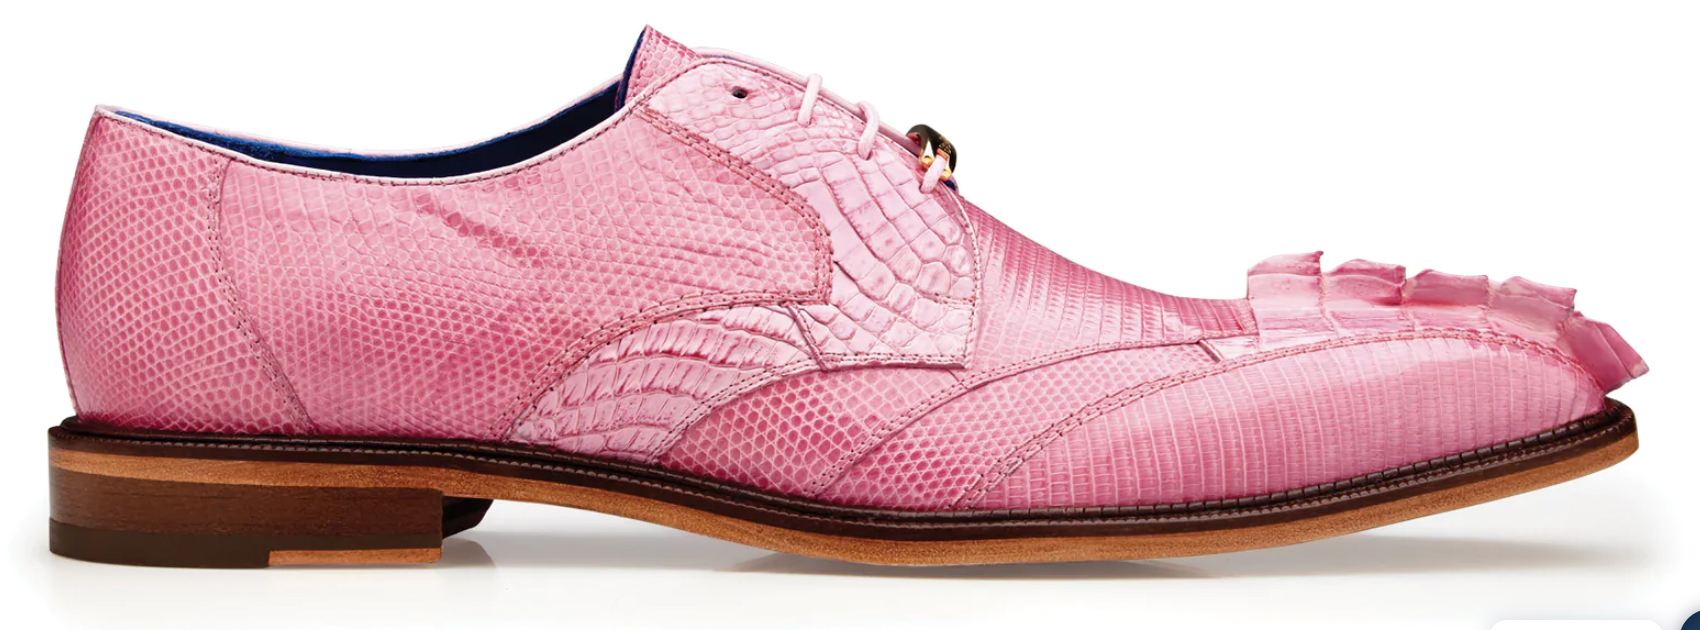 Belvedere Valter Rose Pink Genuine Caiman Crocodile and Lizard Dress Shoes.  - $ :: Upscale Menswear 